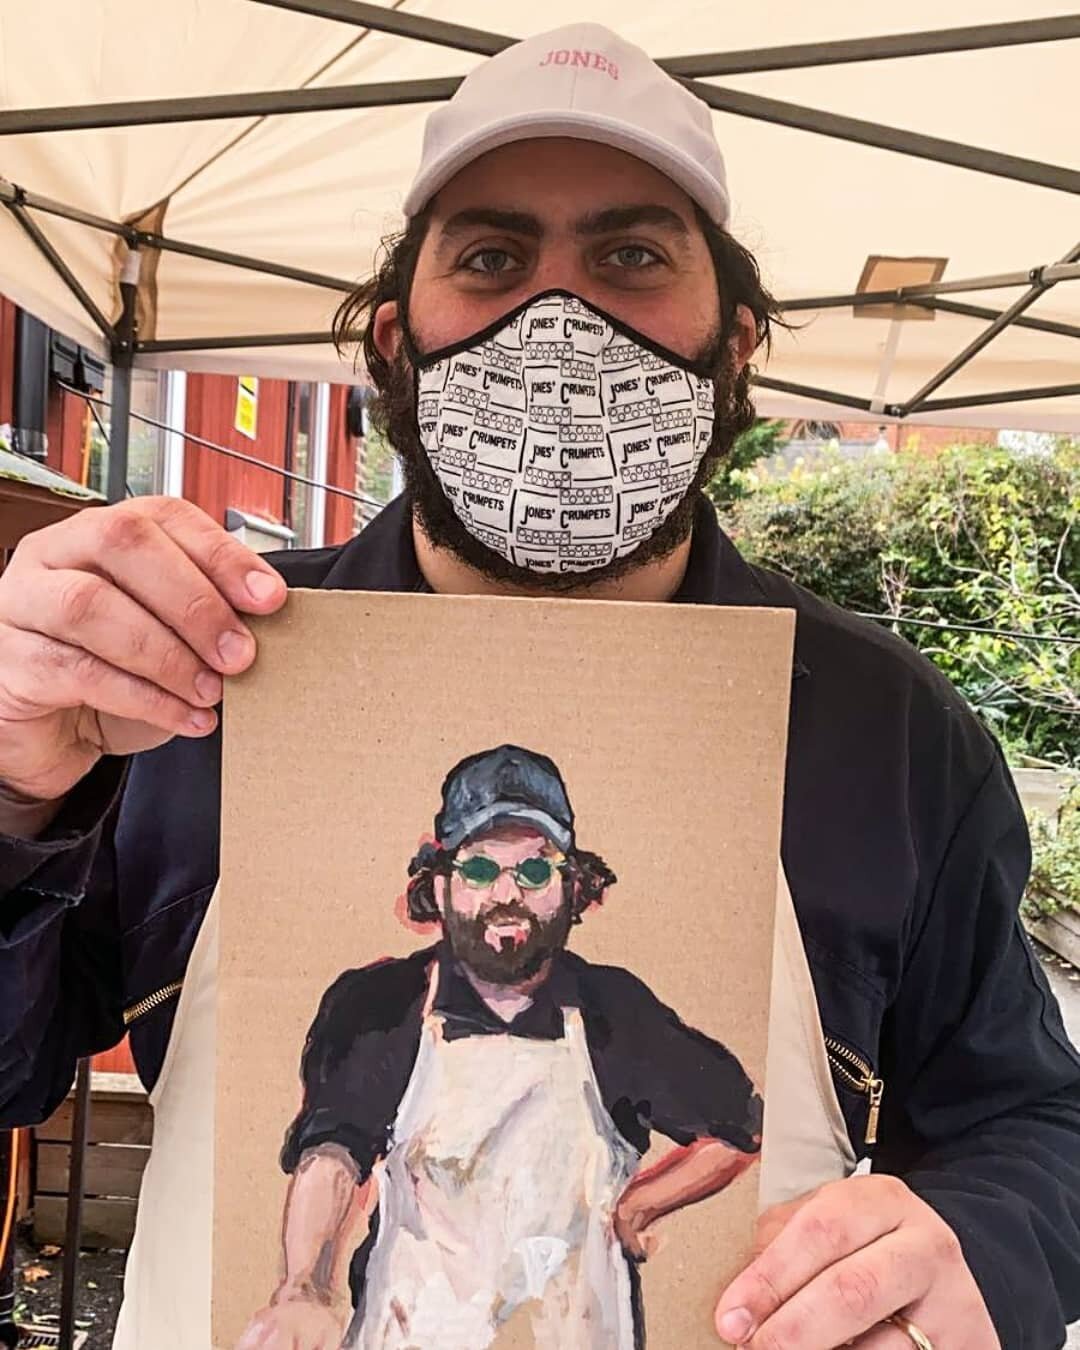 Cool as a crumpet! Ian @jonescrumpets with his #MarketLifeUnderCovid portrait by @lee.mattthews swing by today we ar eopen till 3pm 🙂 and see our stories for some of the goods #stayhopefulsuportlocal #primrosehillfoodmarket